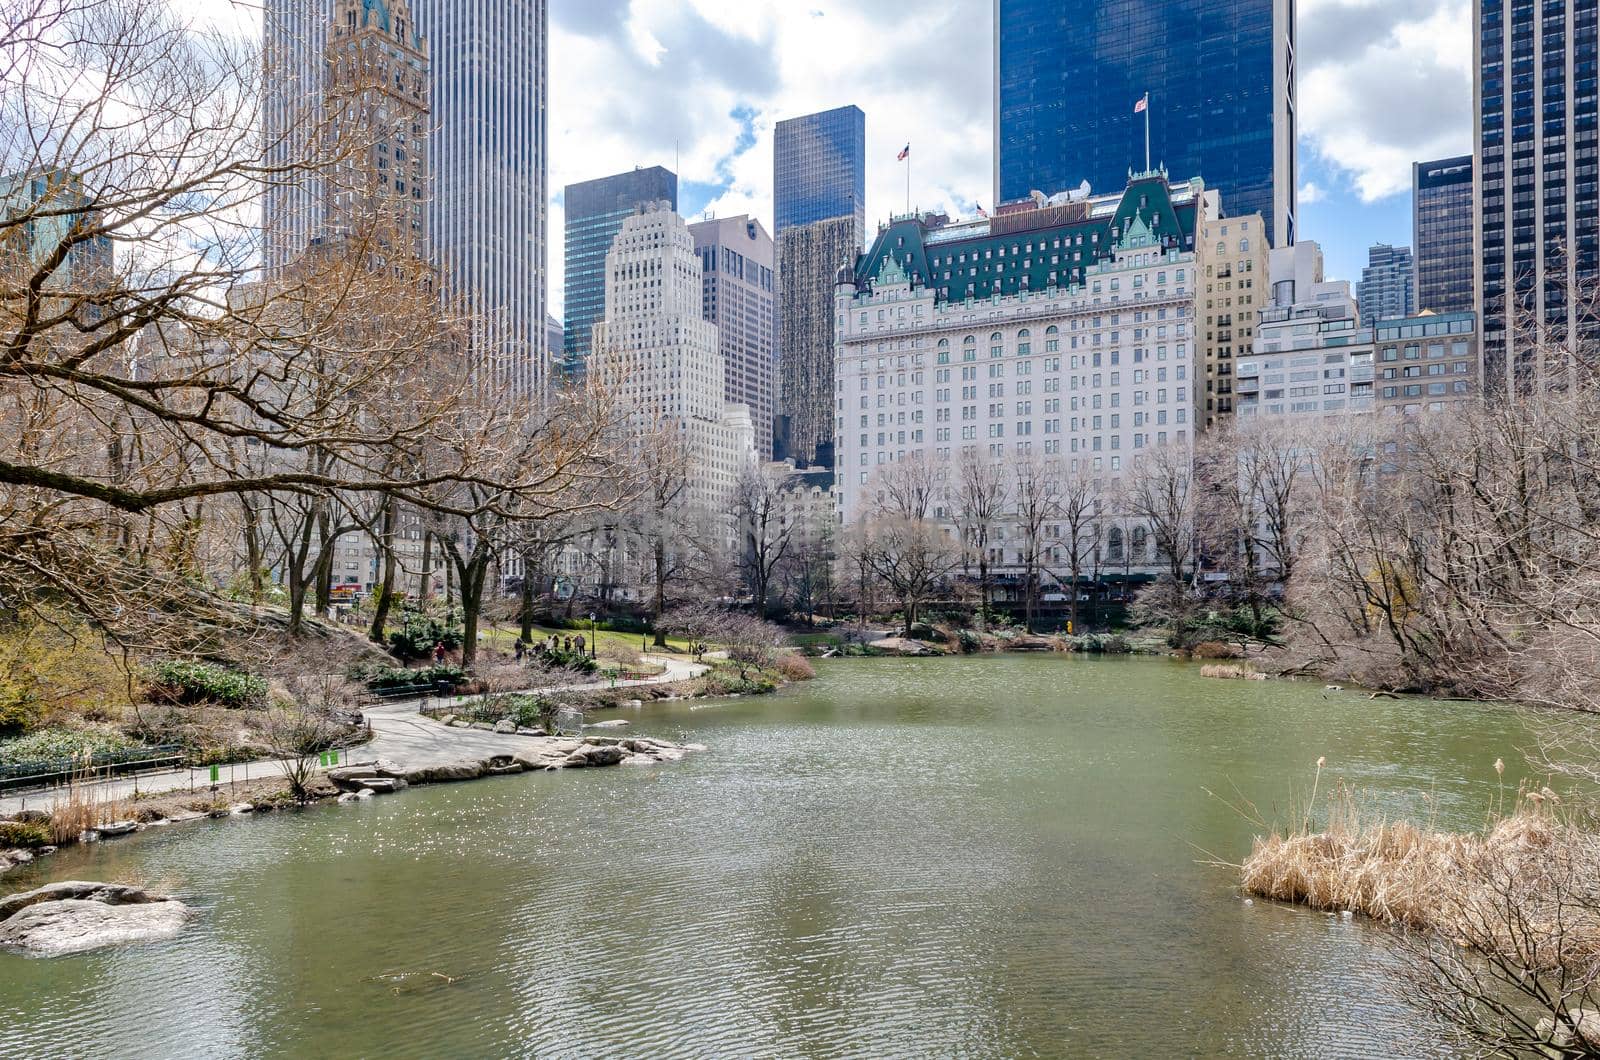 The Pond at Central Park Lake with The Plaza Hotel in Background by bildgigant